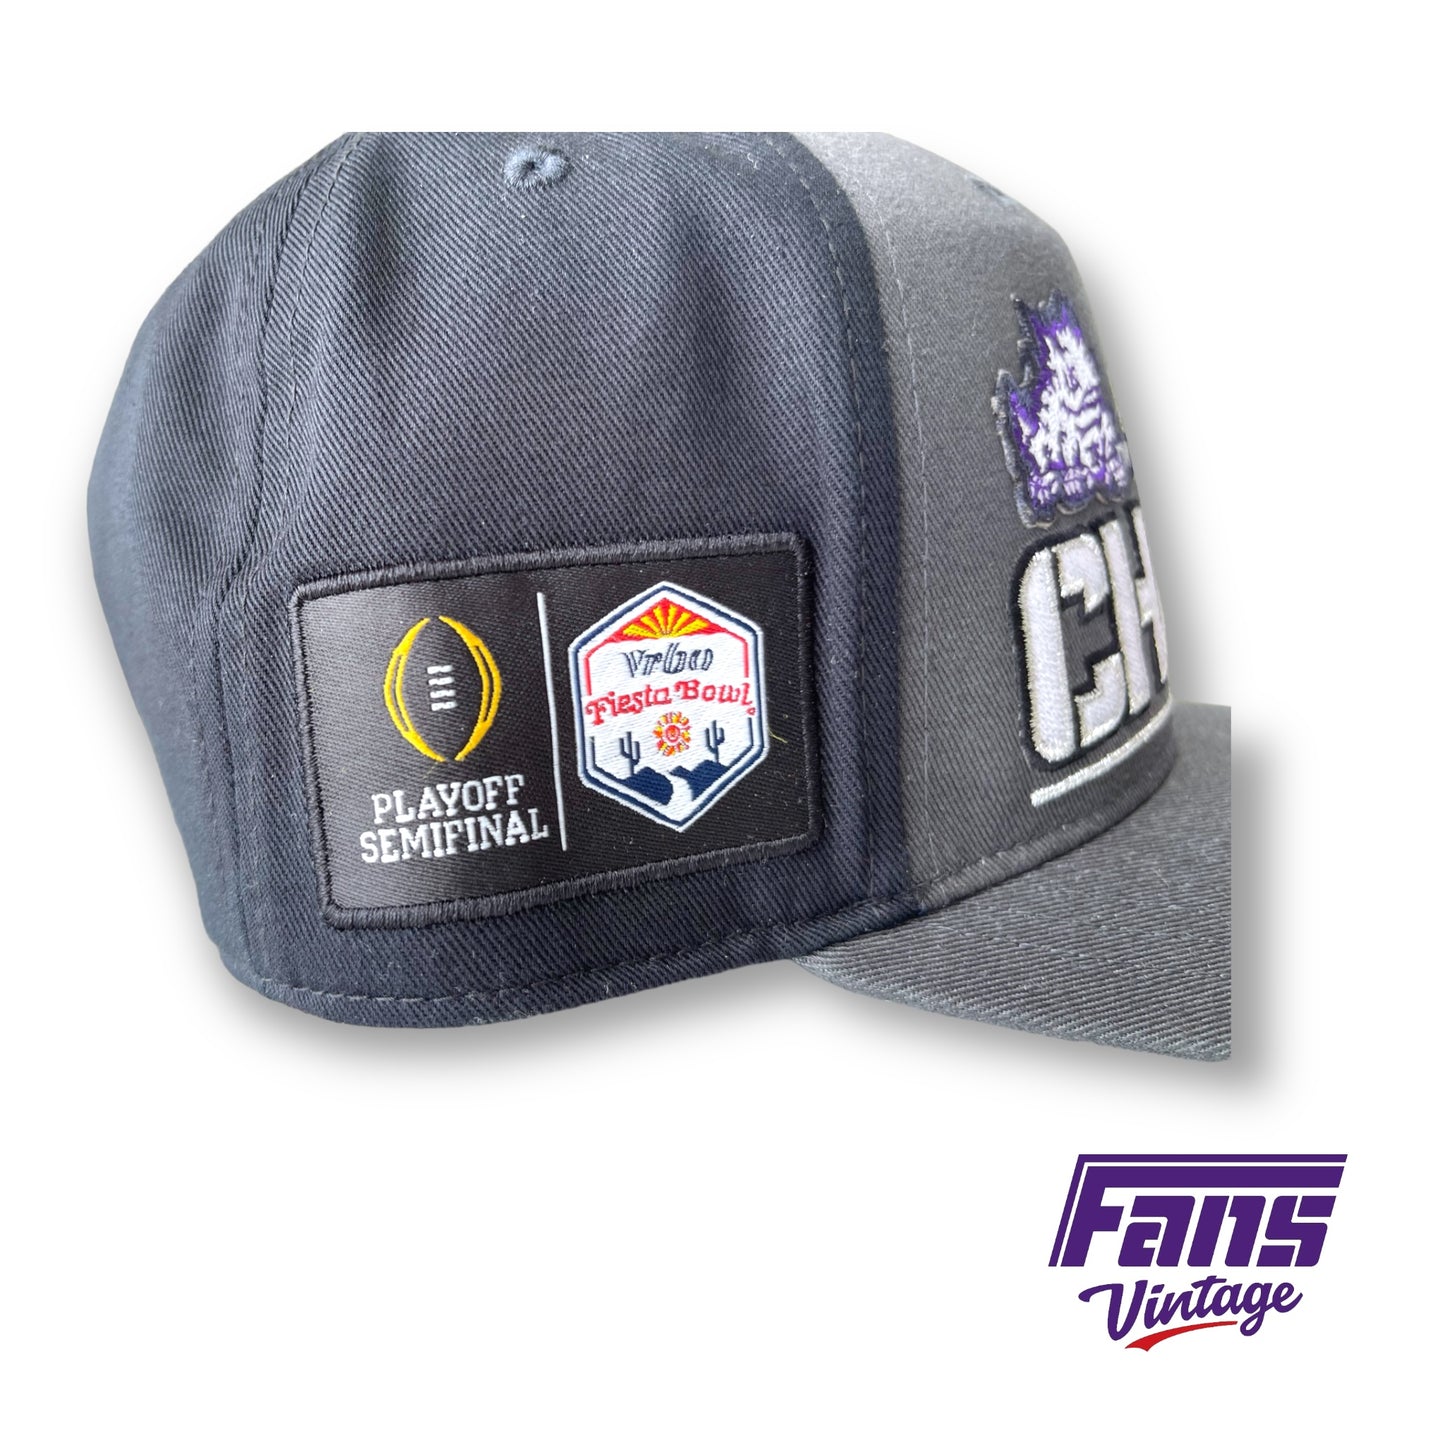 TCU Football Fiesta Bowl Win AUTHENTIC PLAYER ISSUE Nike Post-Game “CHAMPS” Hat